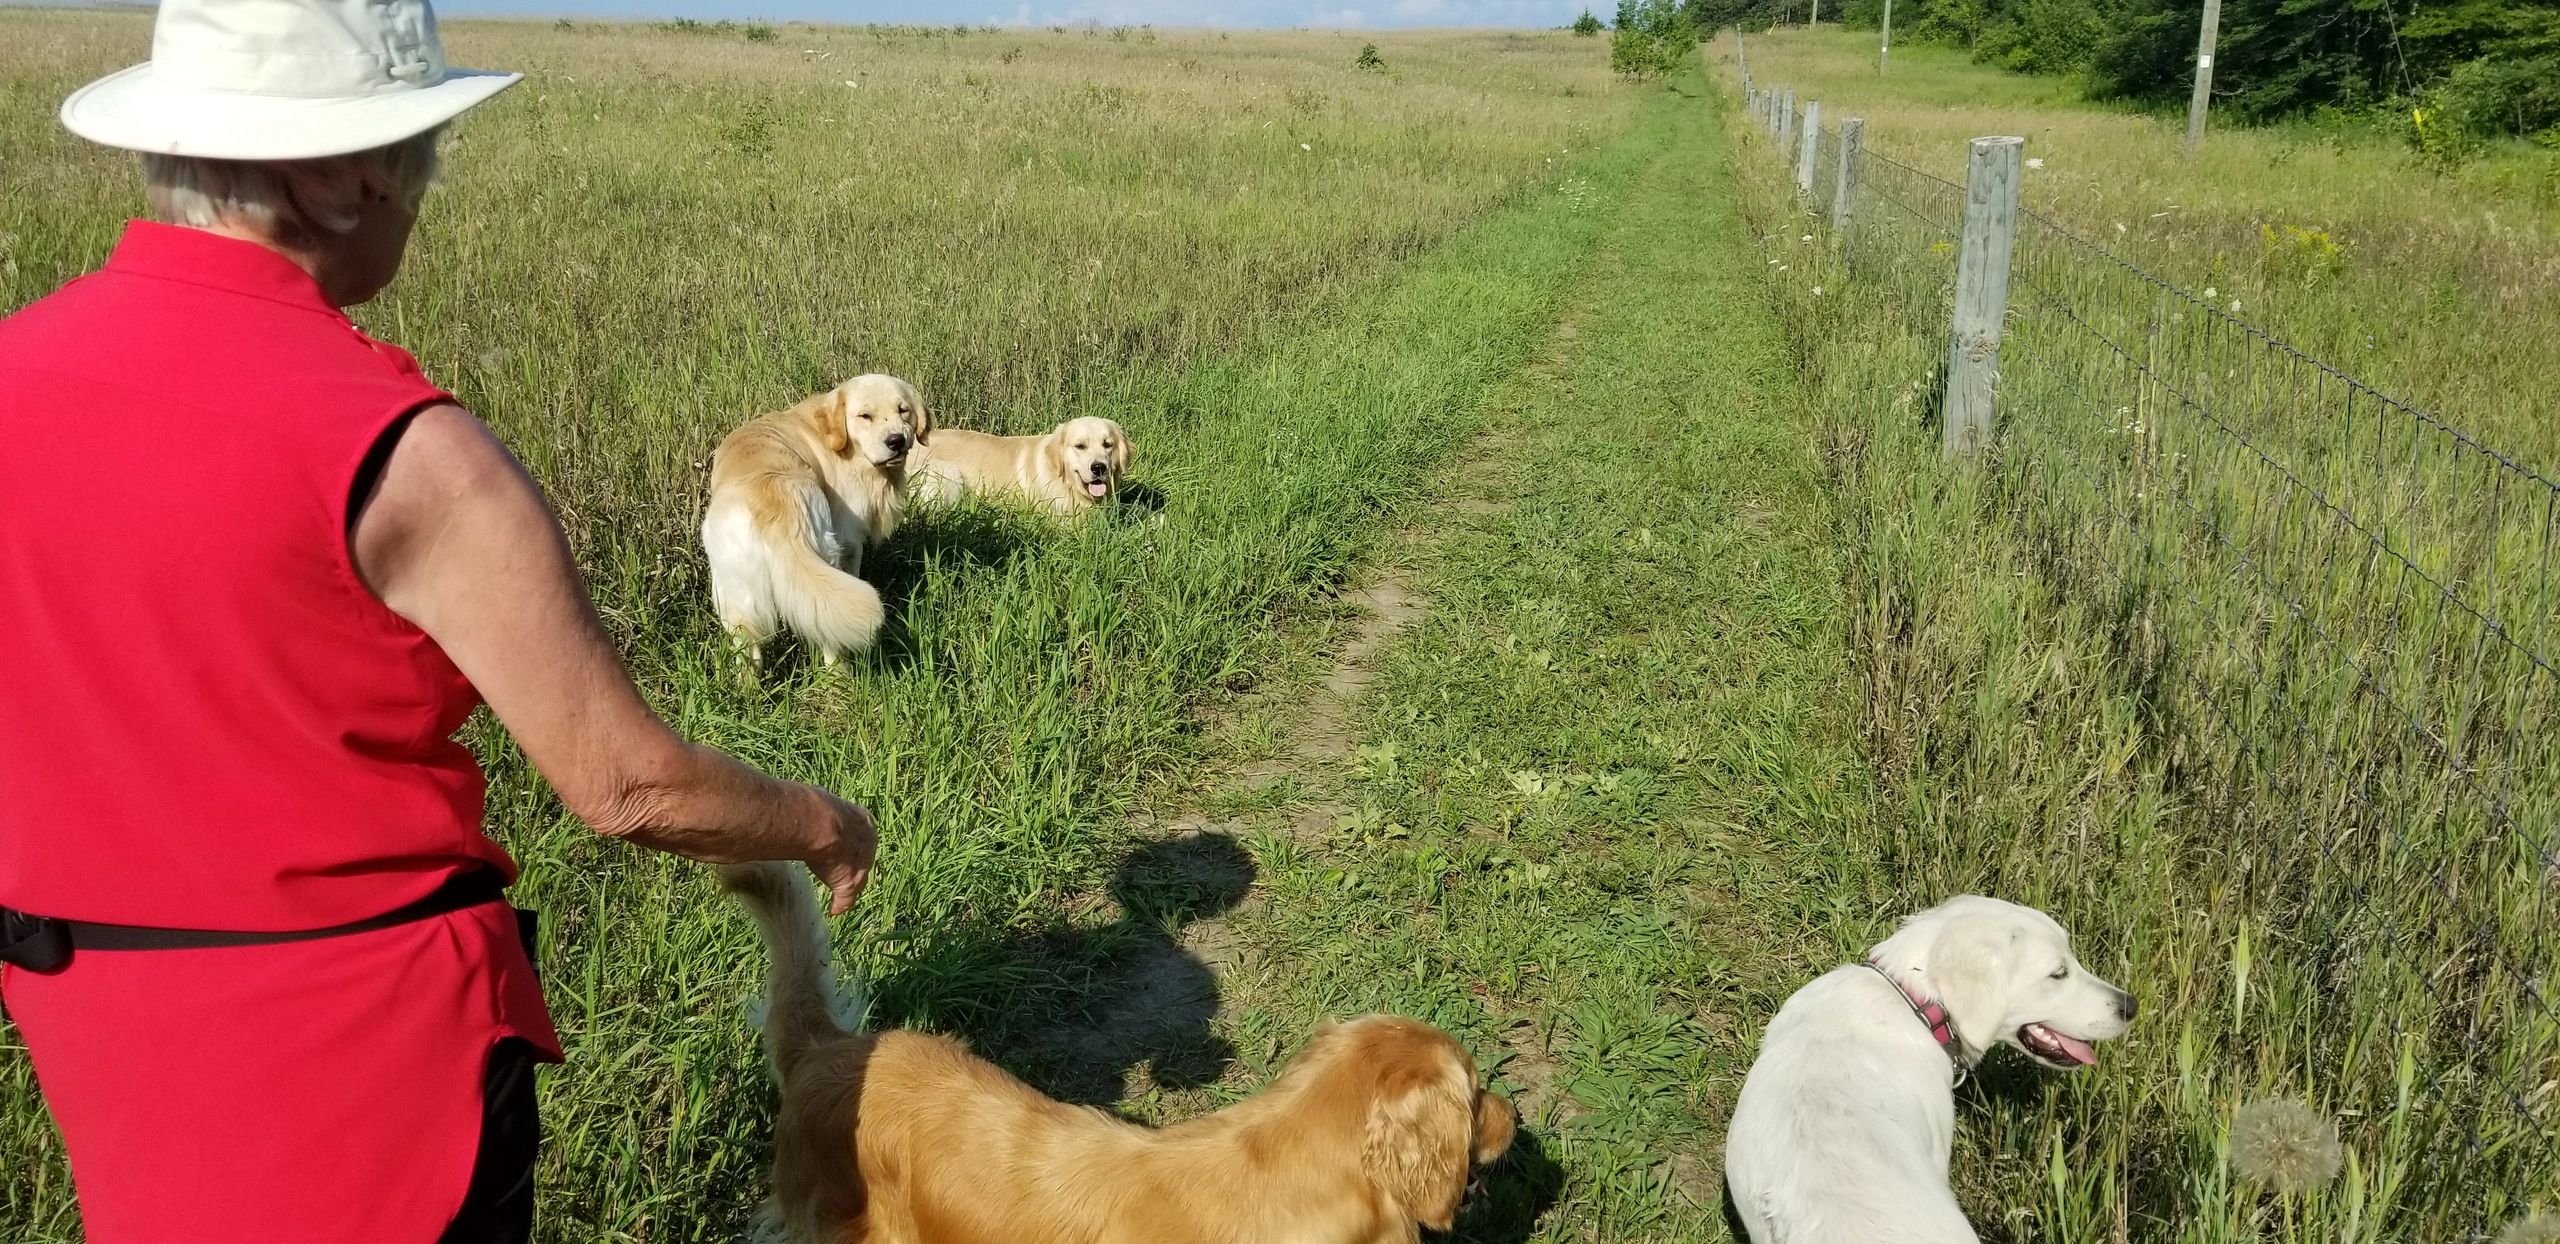 Four golden retrievers running in a field with a person walking